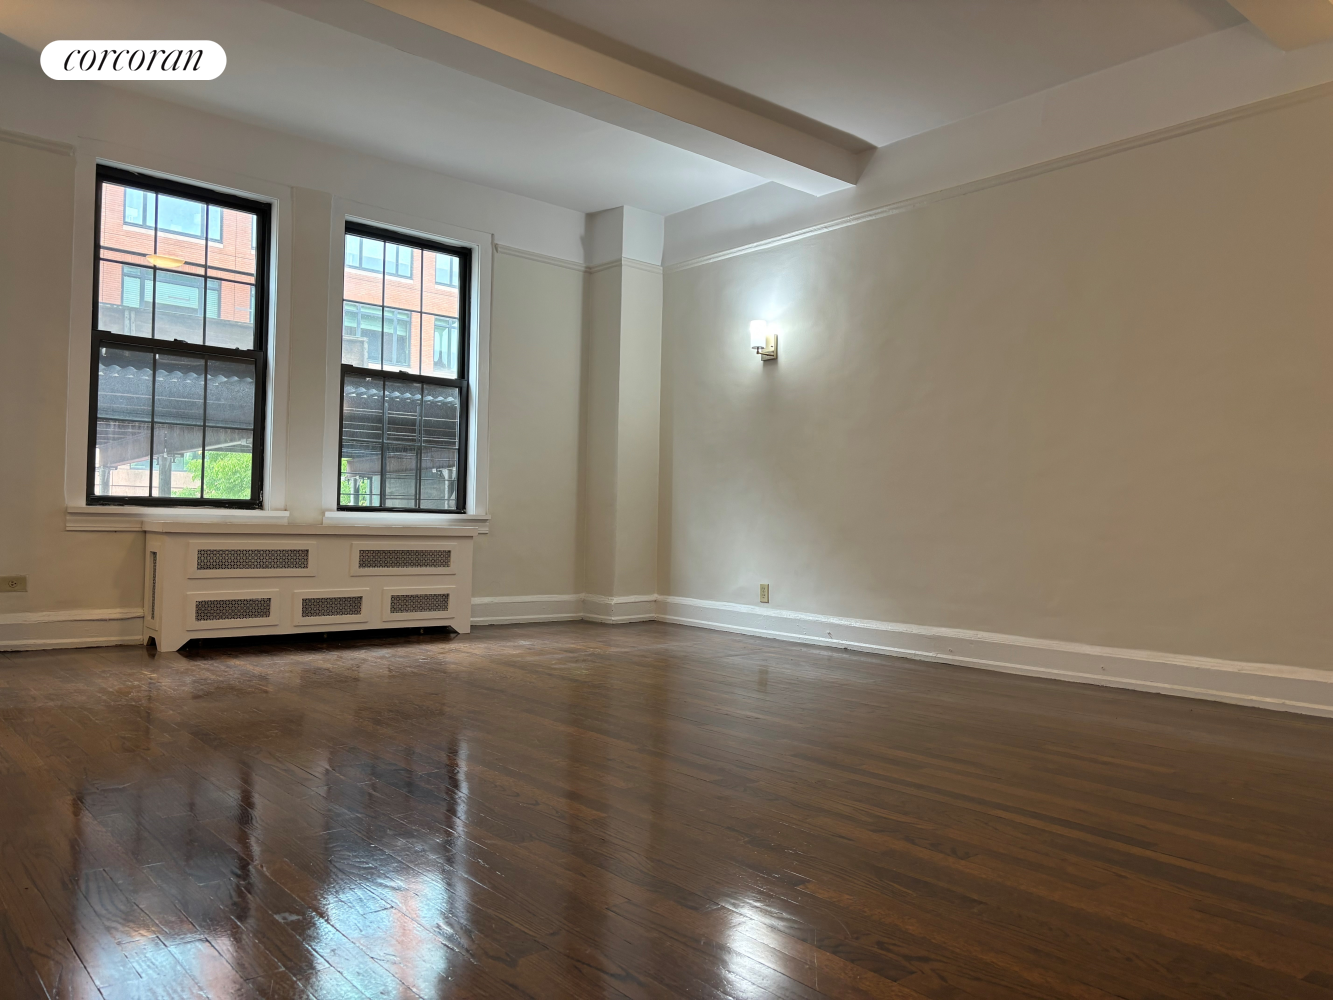 175 West 76th Street 2Ab, Upper West Side, Upper West Side, NYC - 4 Bedrooms  
2.5 Bathrooms  
8 Rooms - 